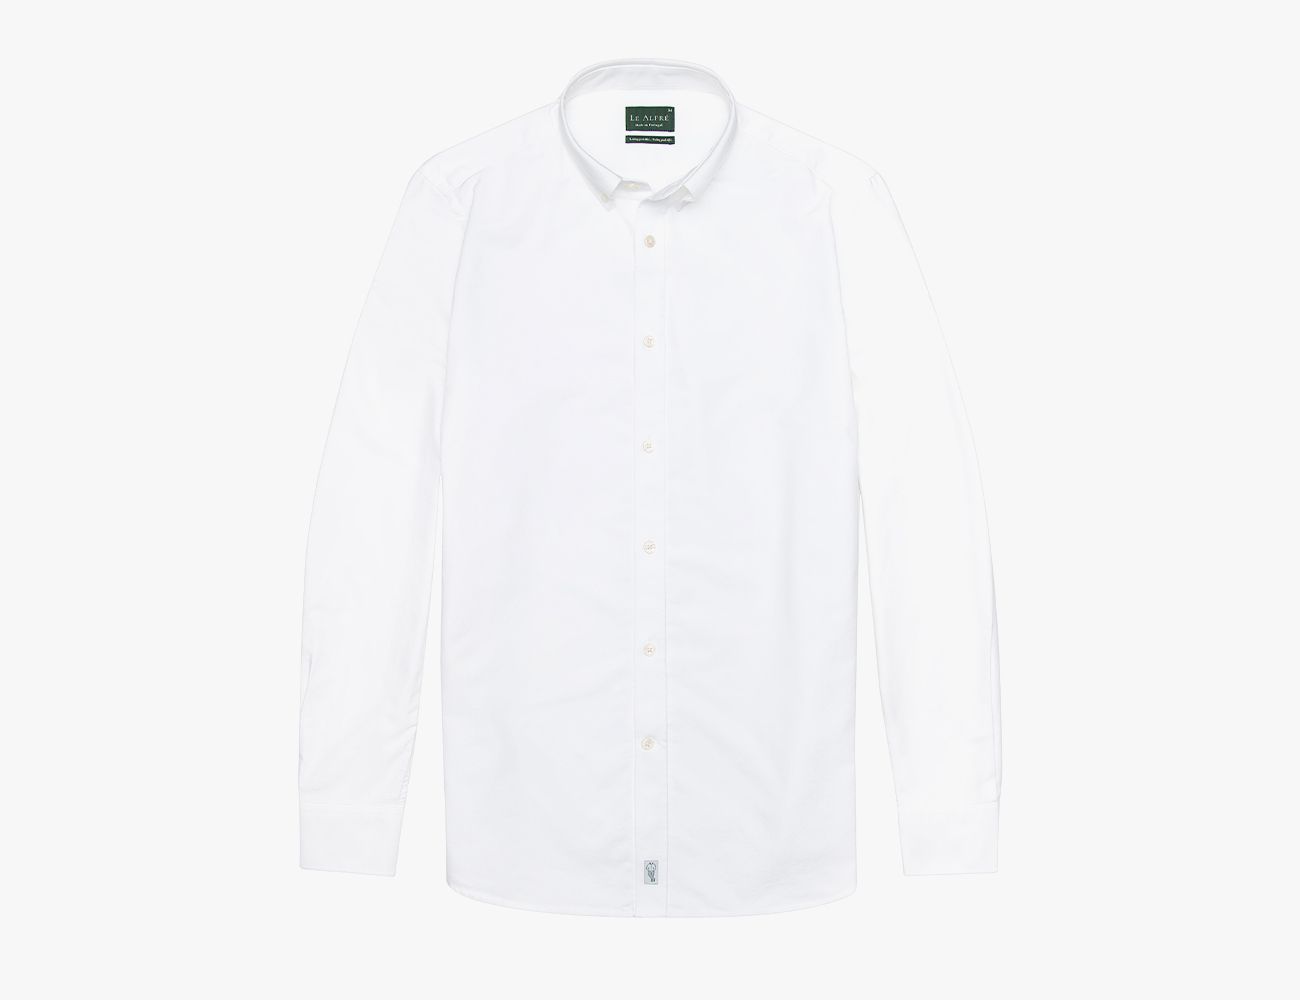 Le Alfré Just Dropped the Best Shirt You Can Buy for Under $100